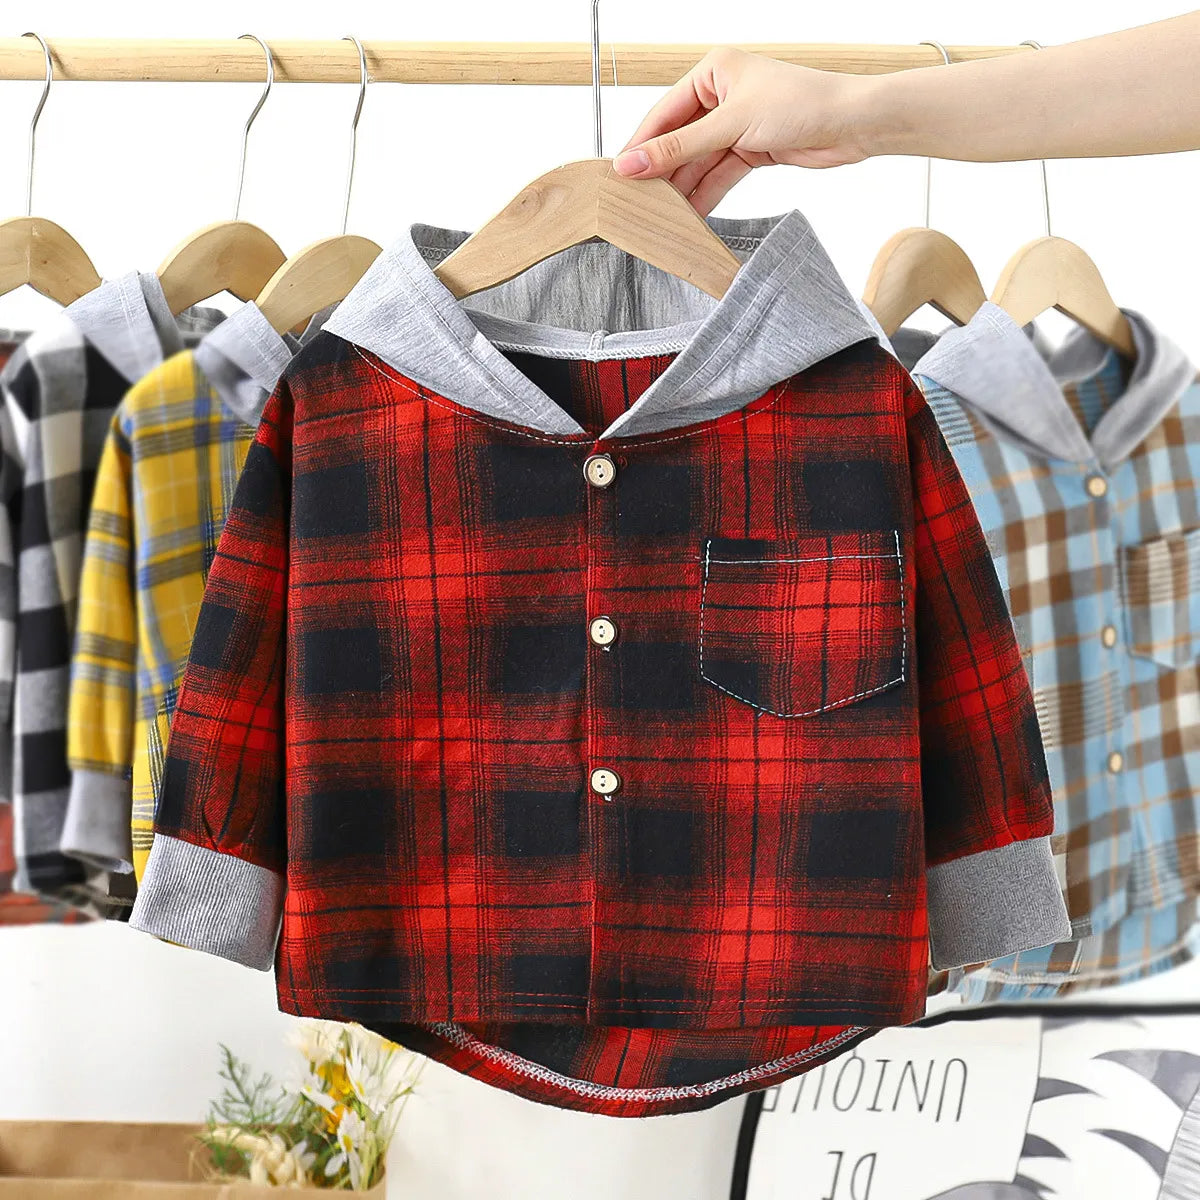 Children's Hooded Shirts Kids Clothes Baby Boys Plaid Shirts Coat for Spring Autumn Girls Long-Sleeve Jacket Bottoming Clothing